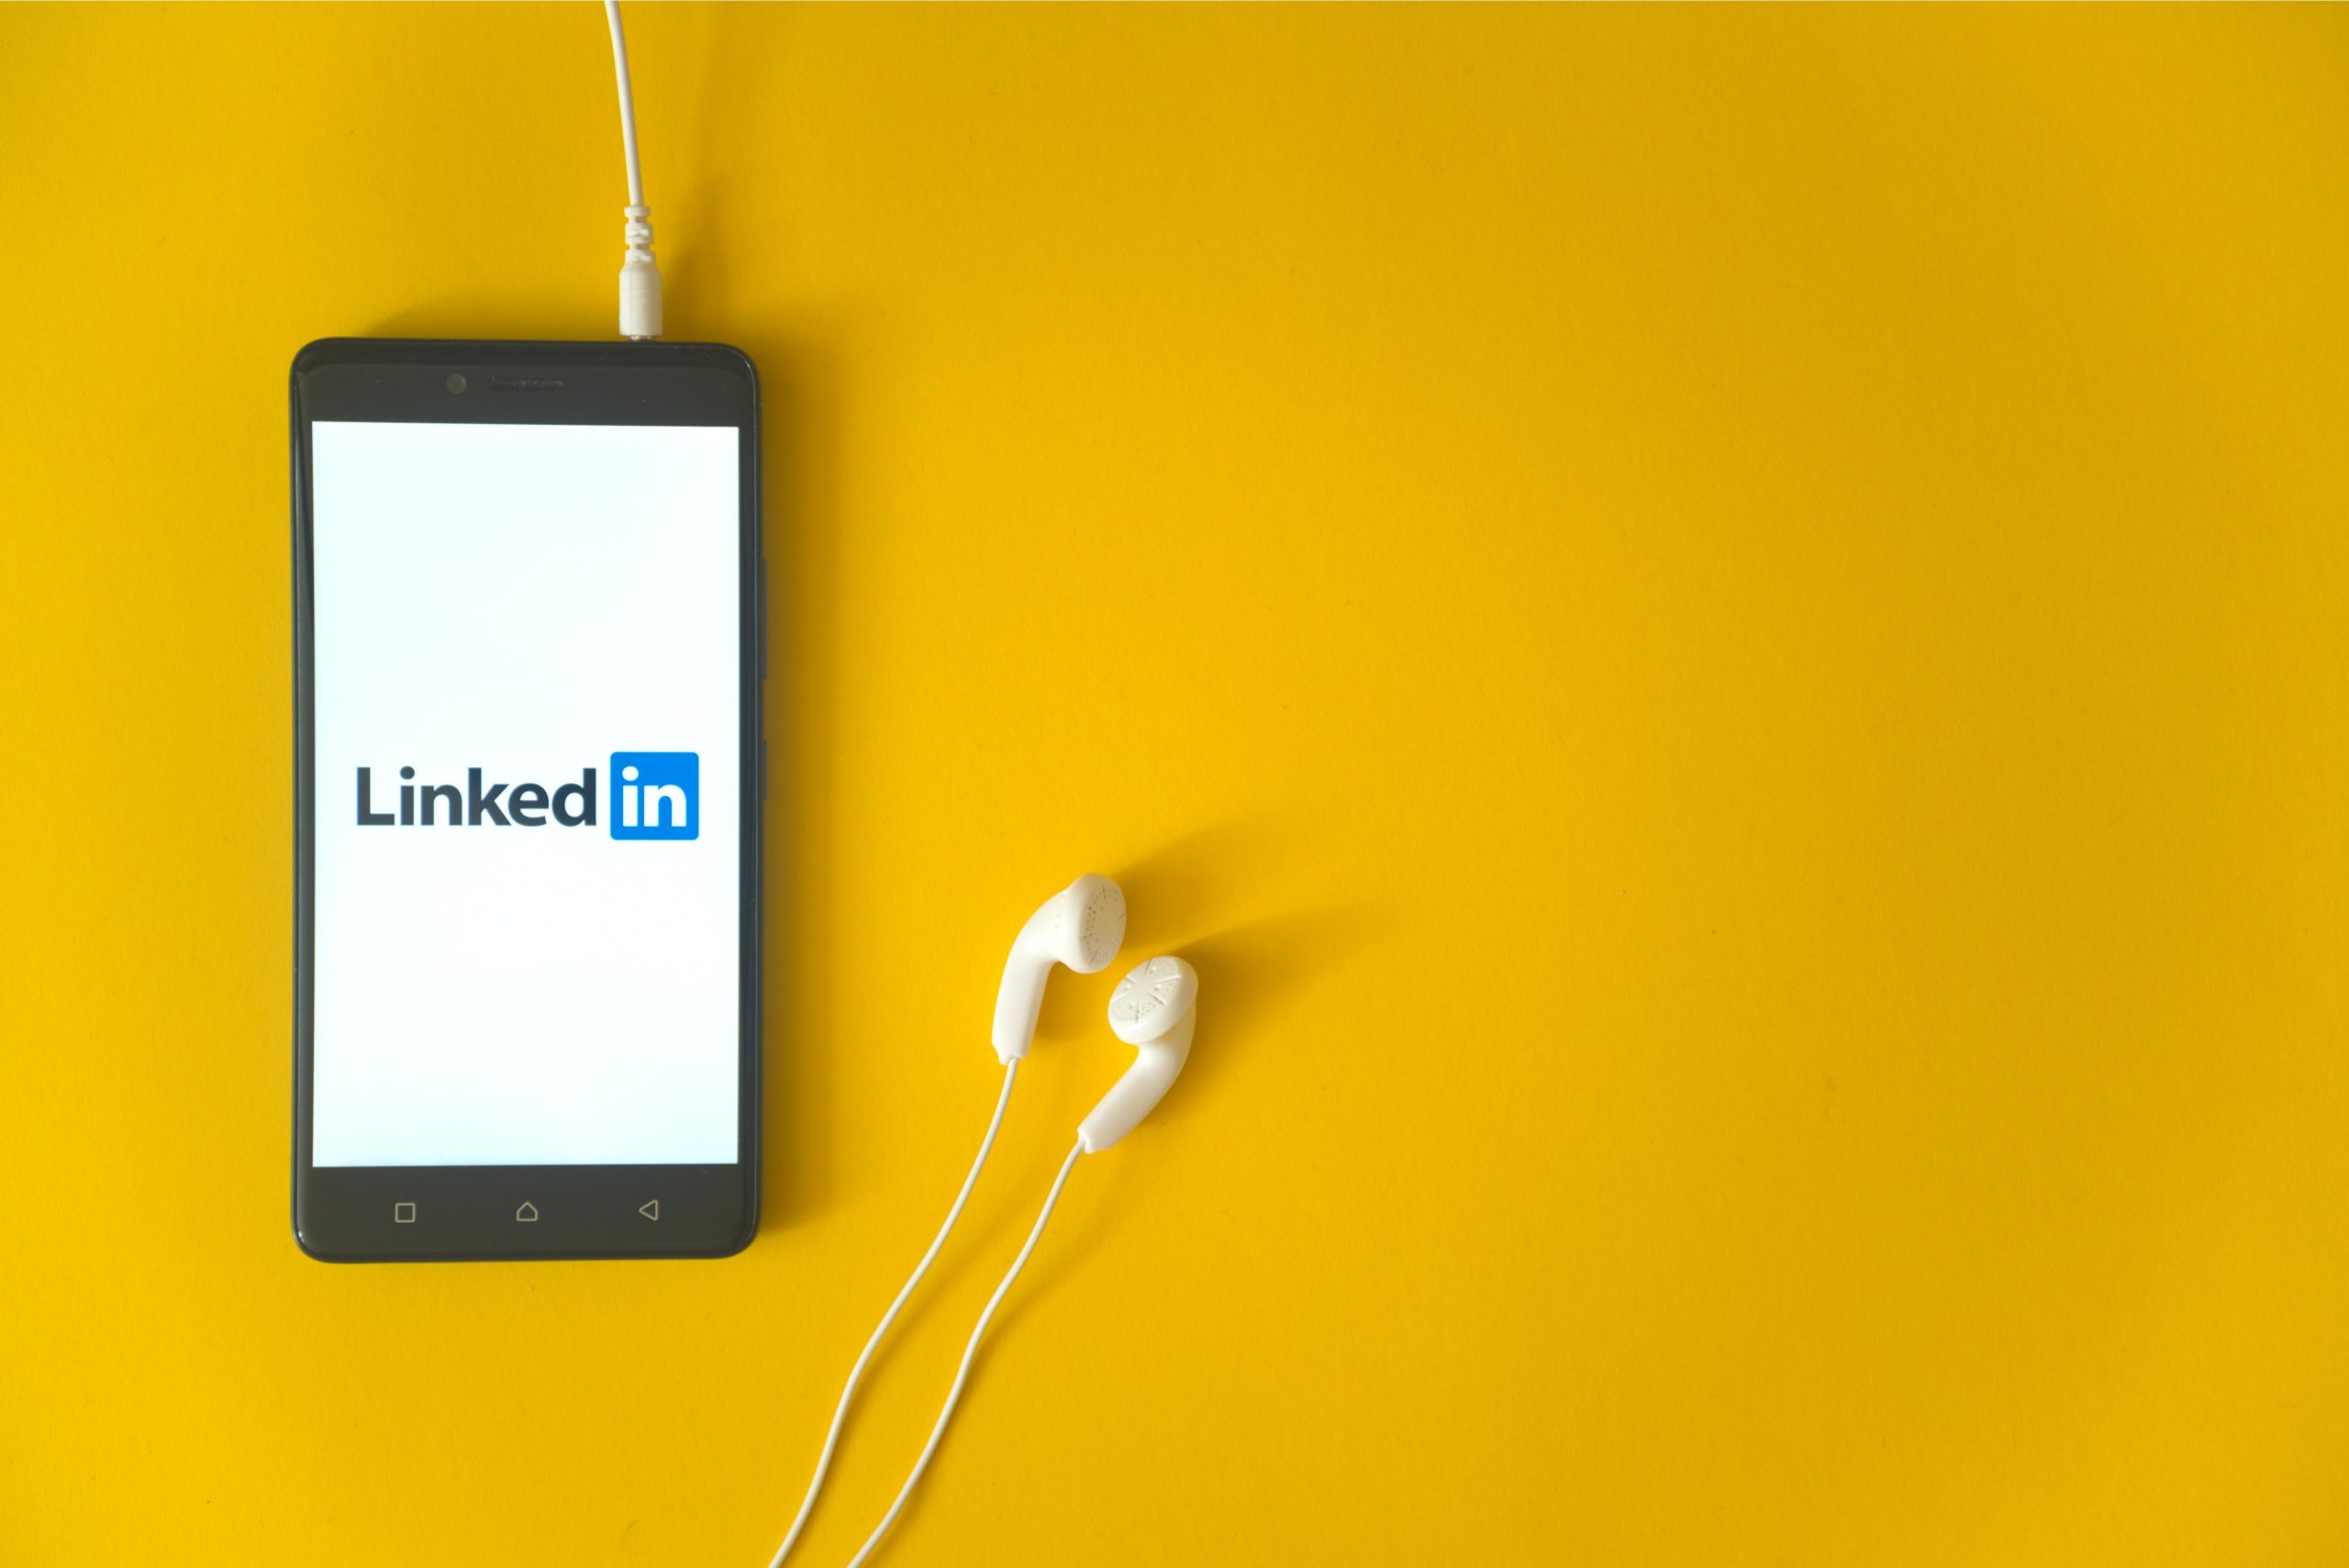 We just passed 10K followers on Linkedin. Here's how we did it...